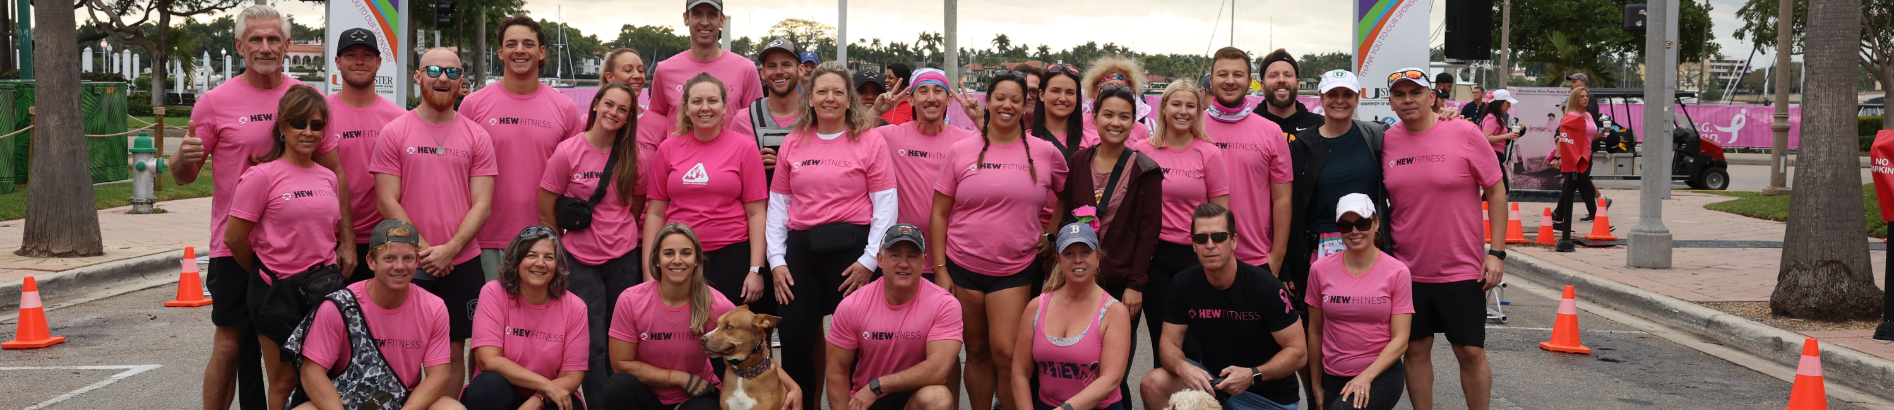 Large group of team members posing at a Komen event